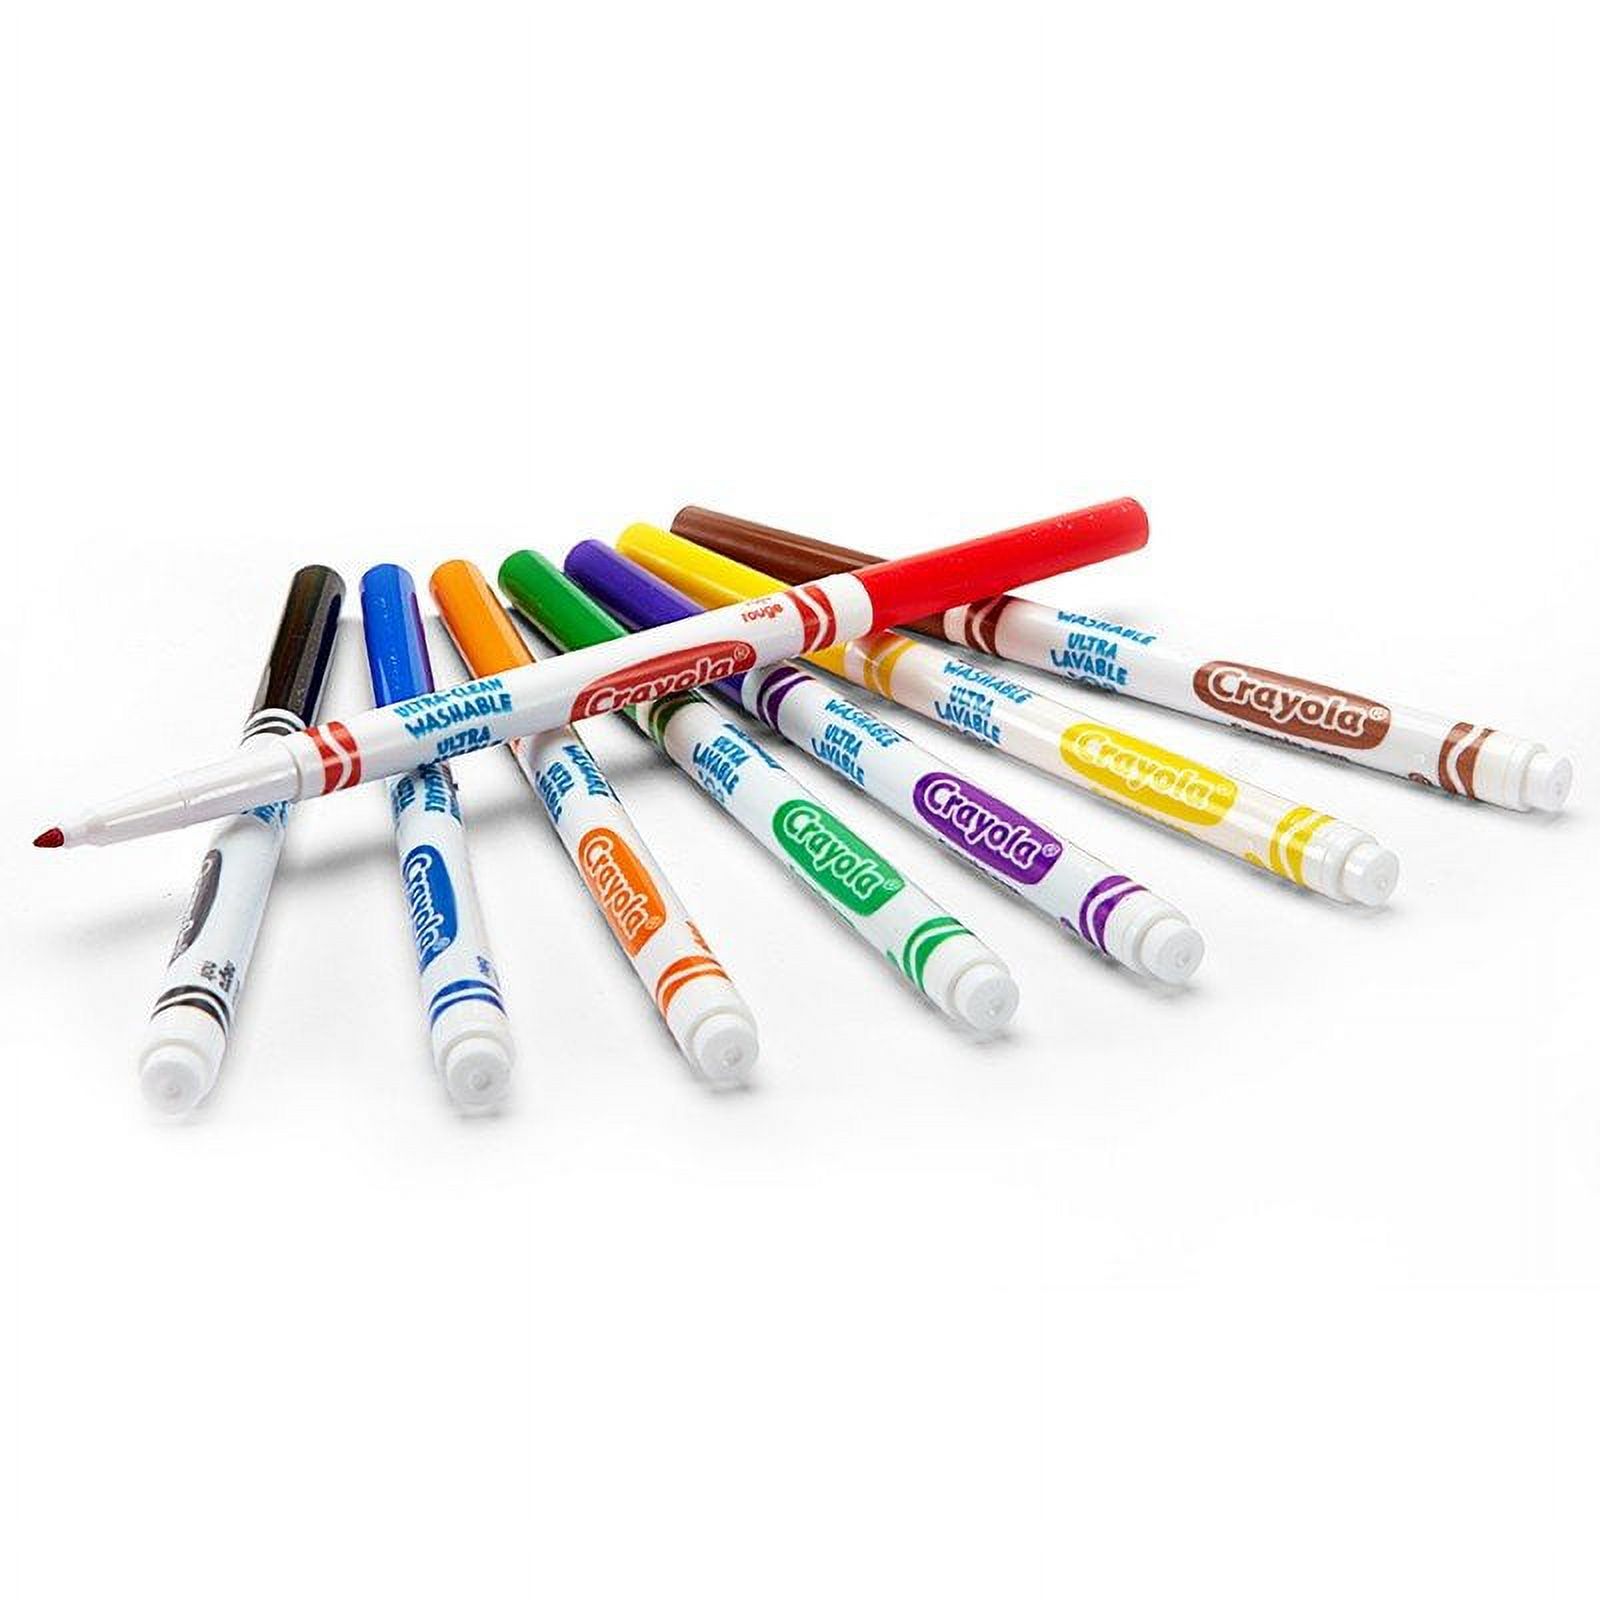 Crayola Washable Markers, Fine Point, Classic Colors, 8 Count - image 3 of 5